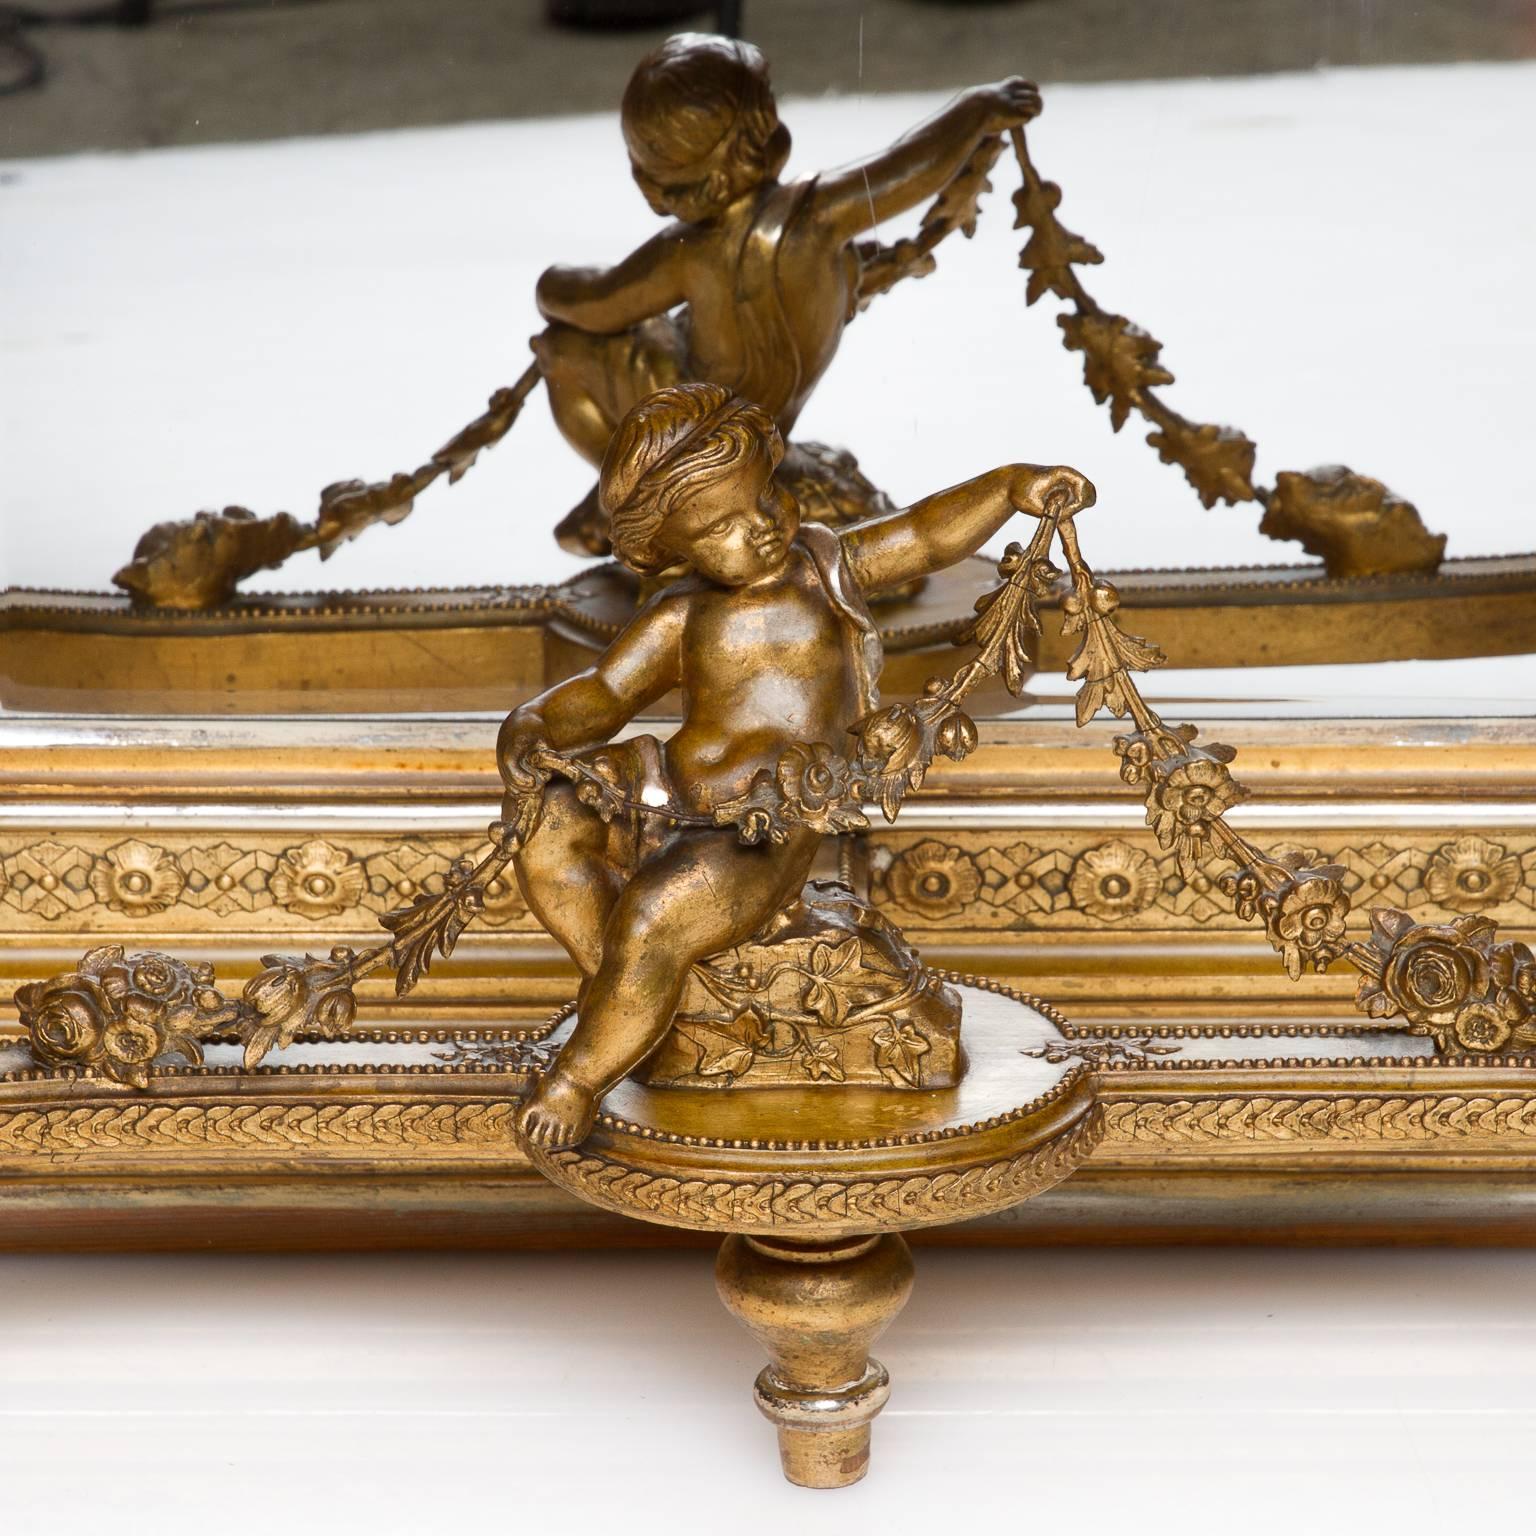 A fine example of a Louis XVI polychrome marble-top console with mirror back. An ornate stretcher centered with a carved wood putti with swags of garland draping over the lap. There is a beveled mirror framed in the back. Very fine detailed legs and